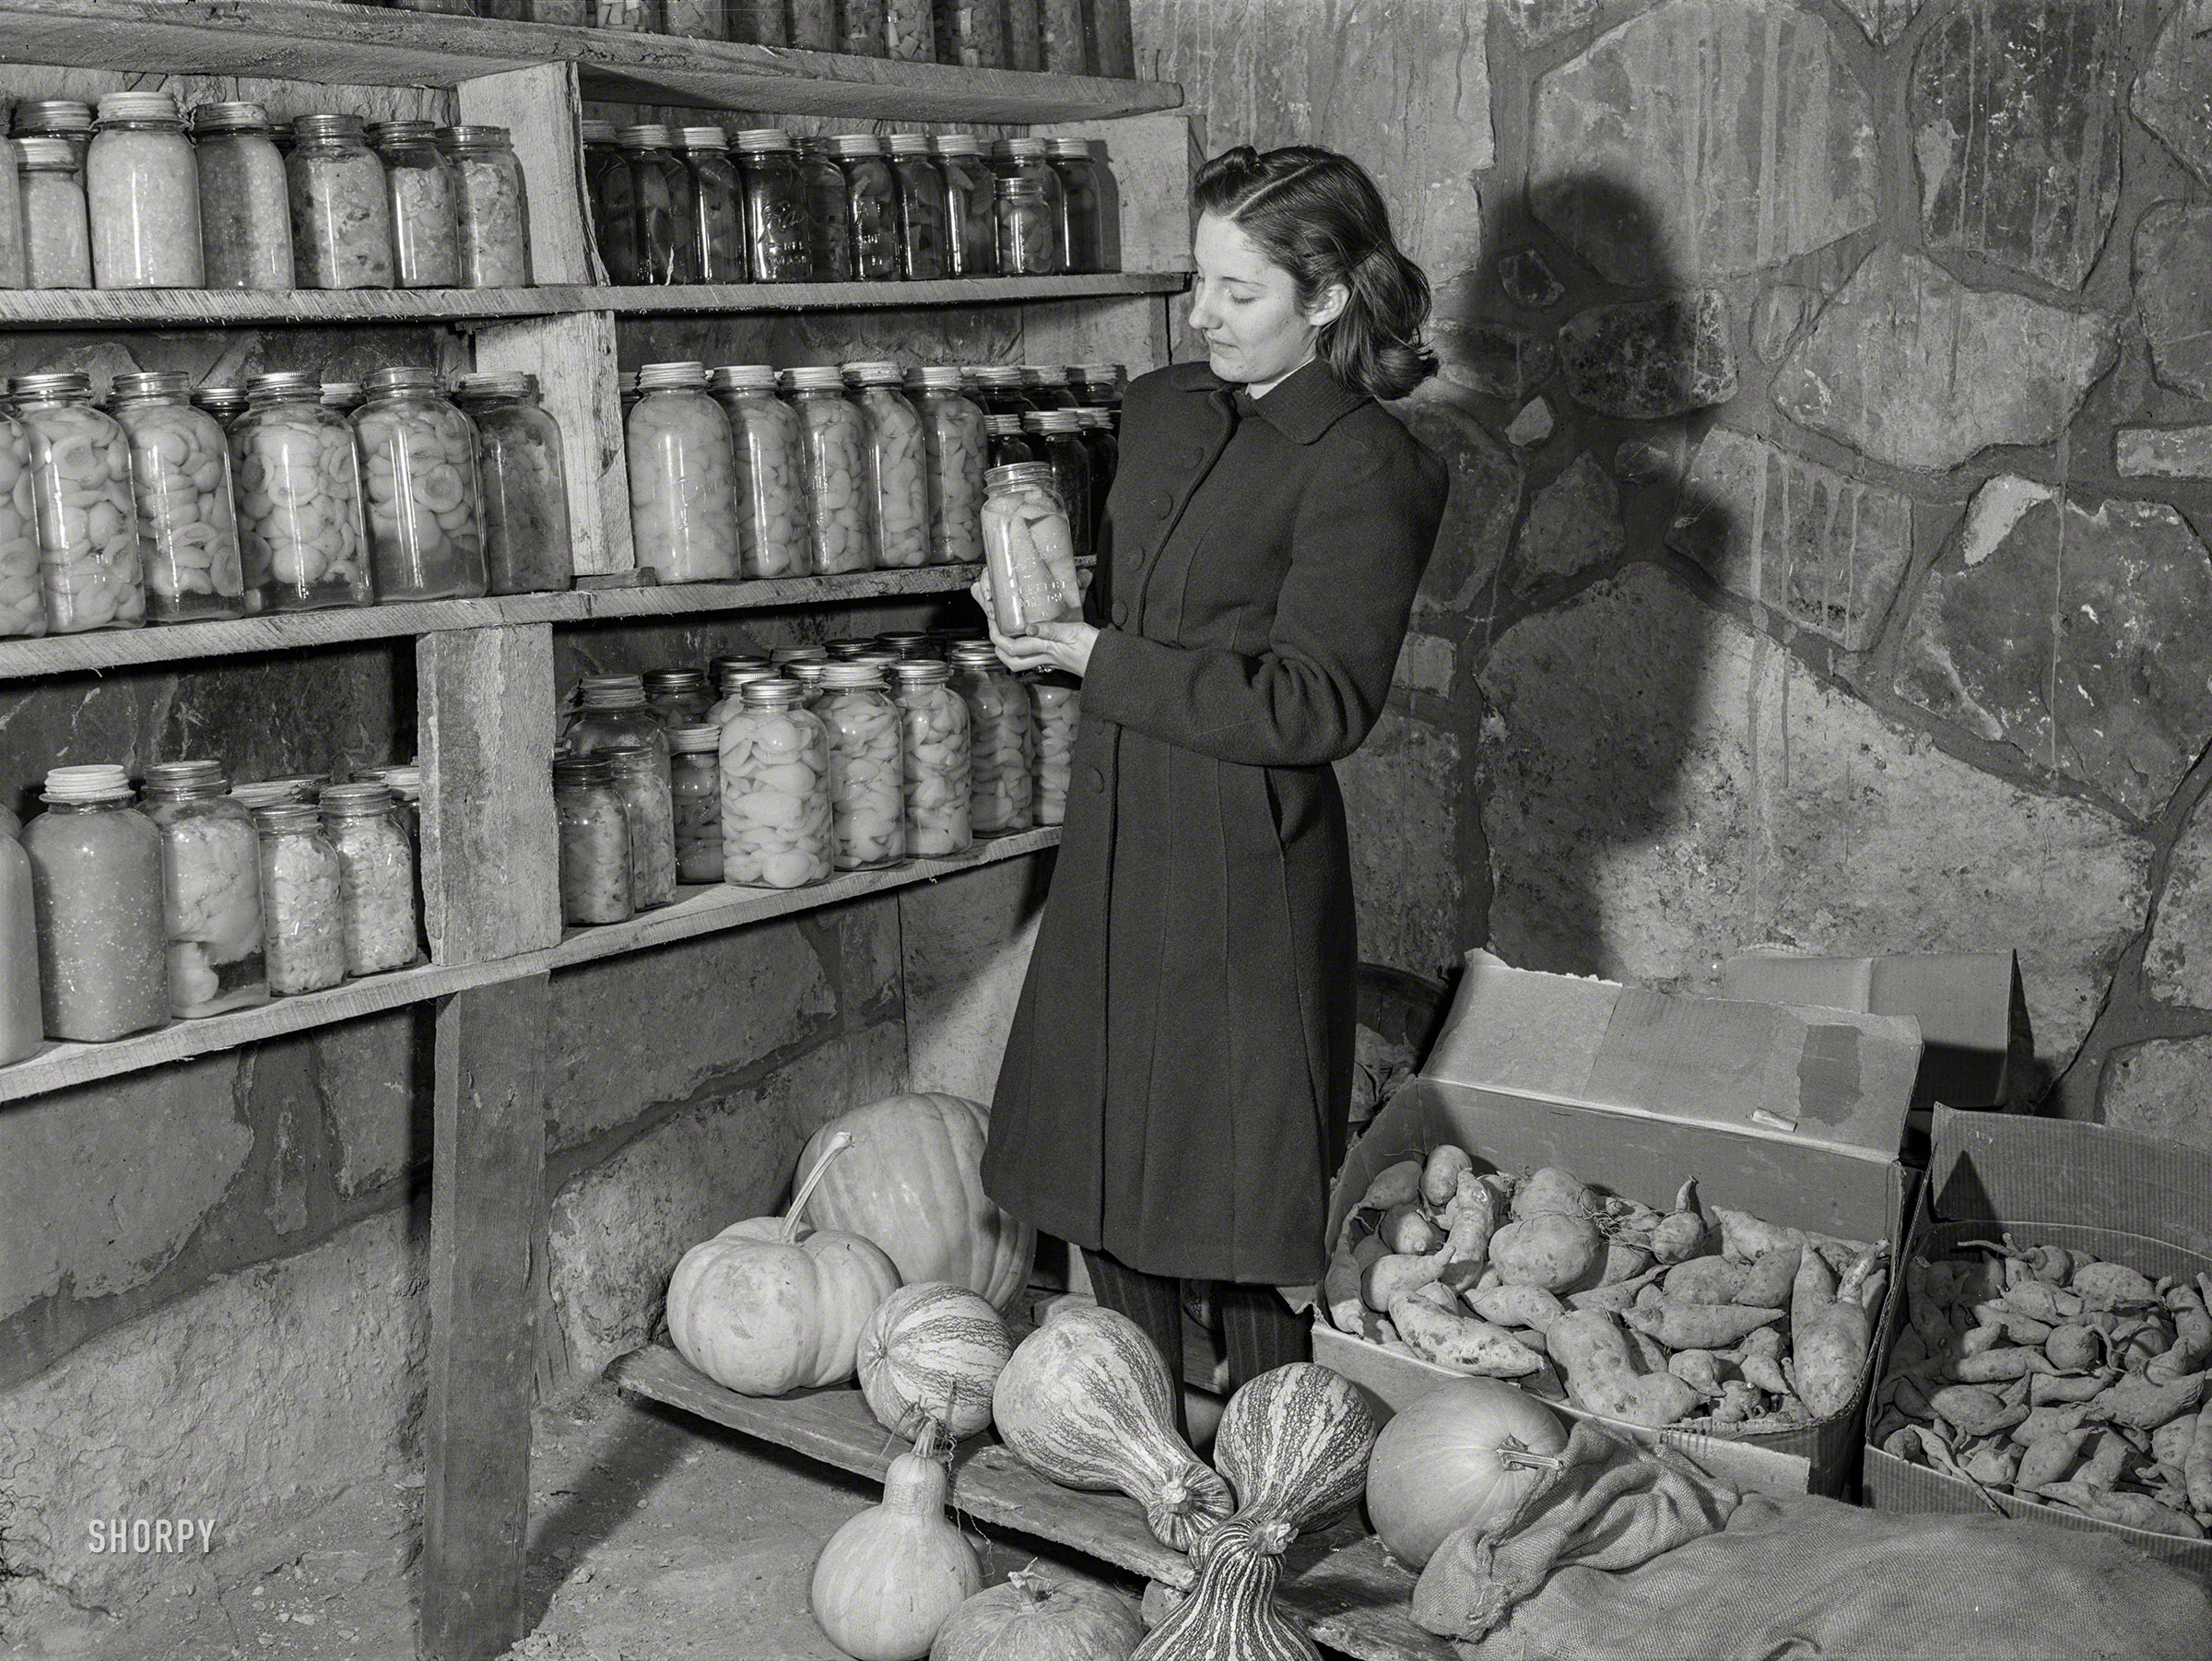 November 1940. "S.H. Castle's vegetables and canned goods [more here] raised on his farm in his new storage house. Southern Appalachian Project near Barbourville, Knox County, Kentucky." Photo by Marion Post Wolcott for the Farm Security Administration. View full size.